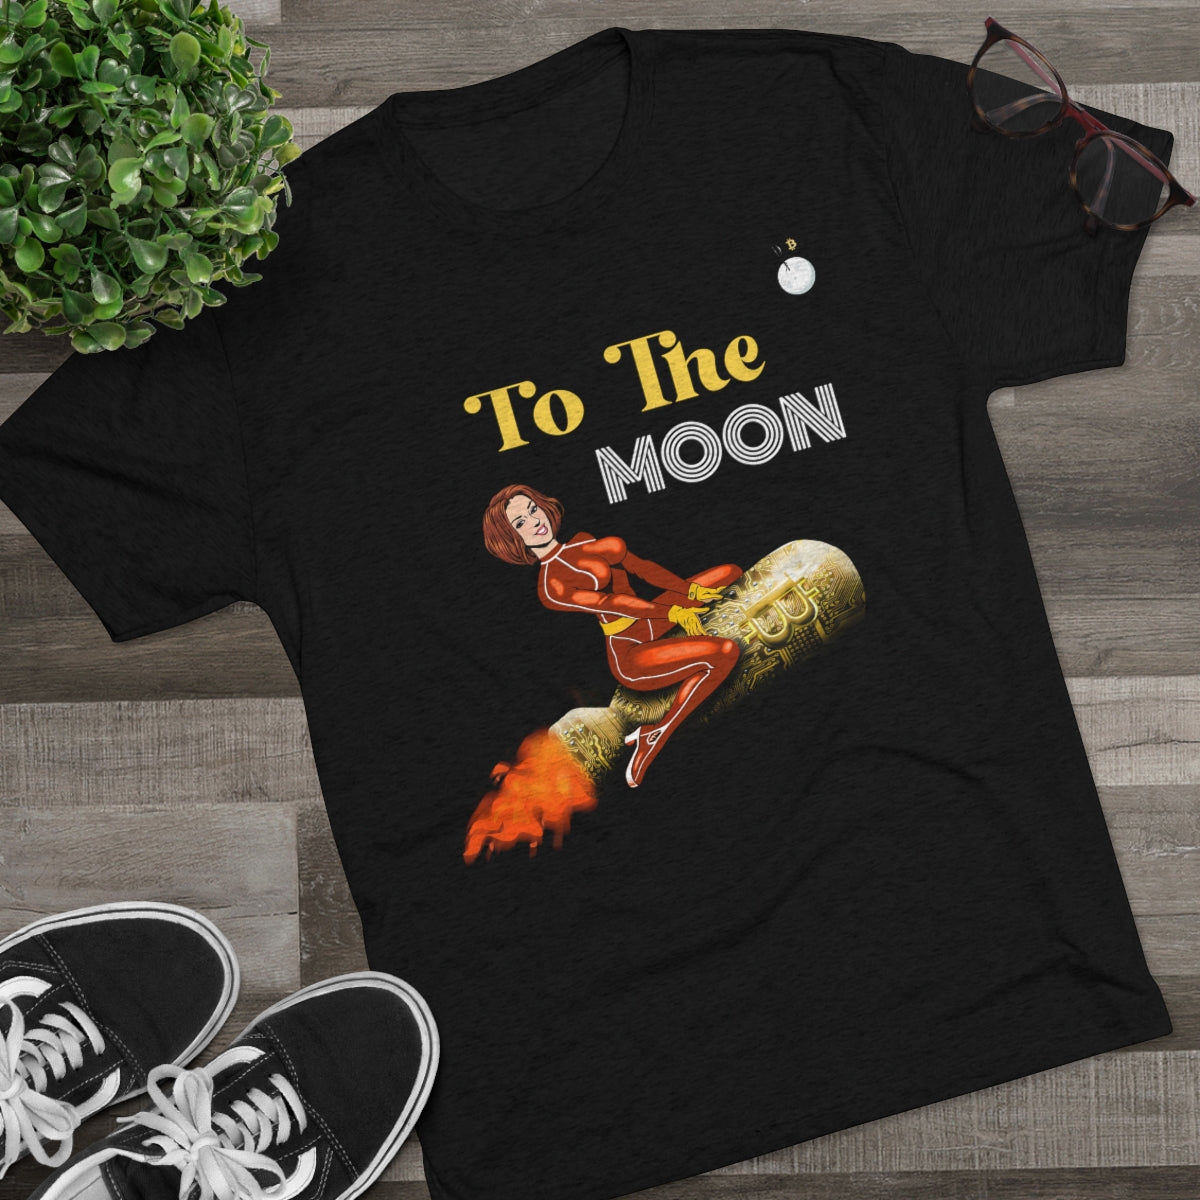 Going to the Moon Tee